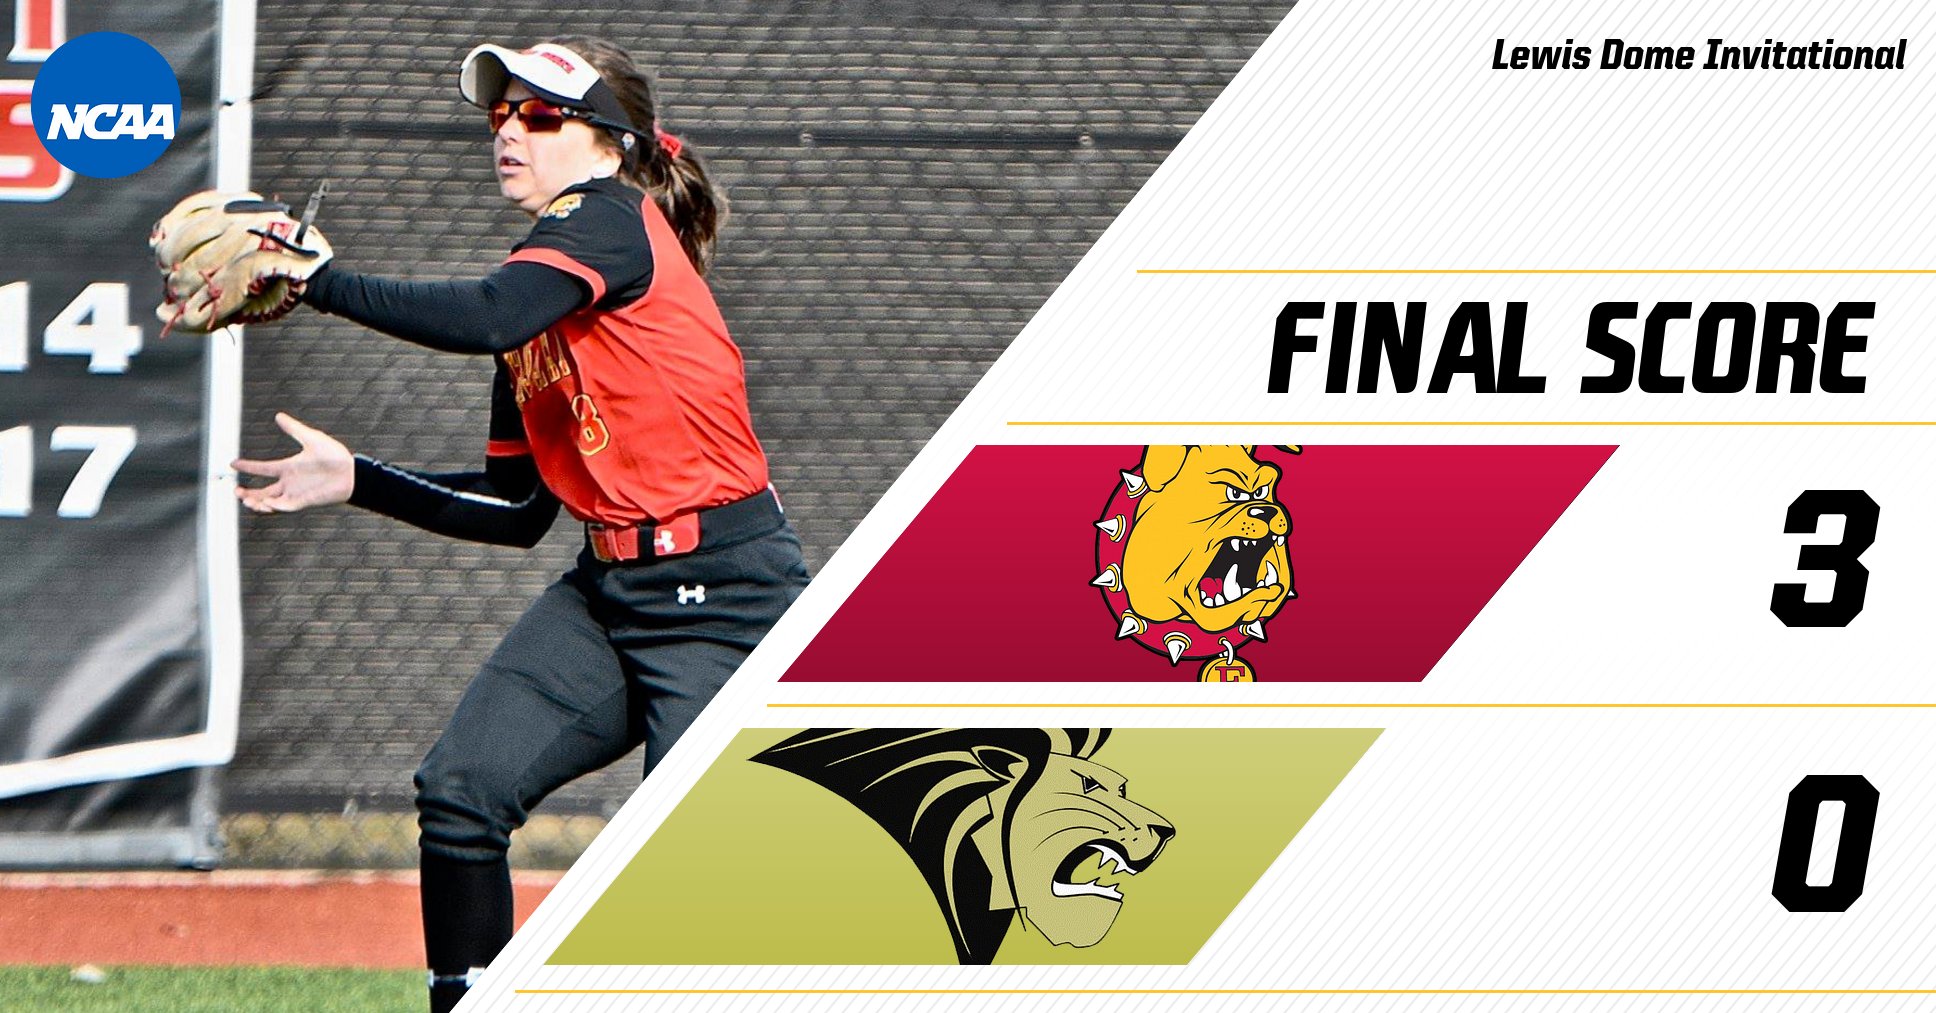 Ferris State Softball Earns Season-Opening Shutout Victory At Lewis Dome Invite